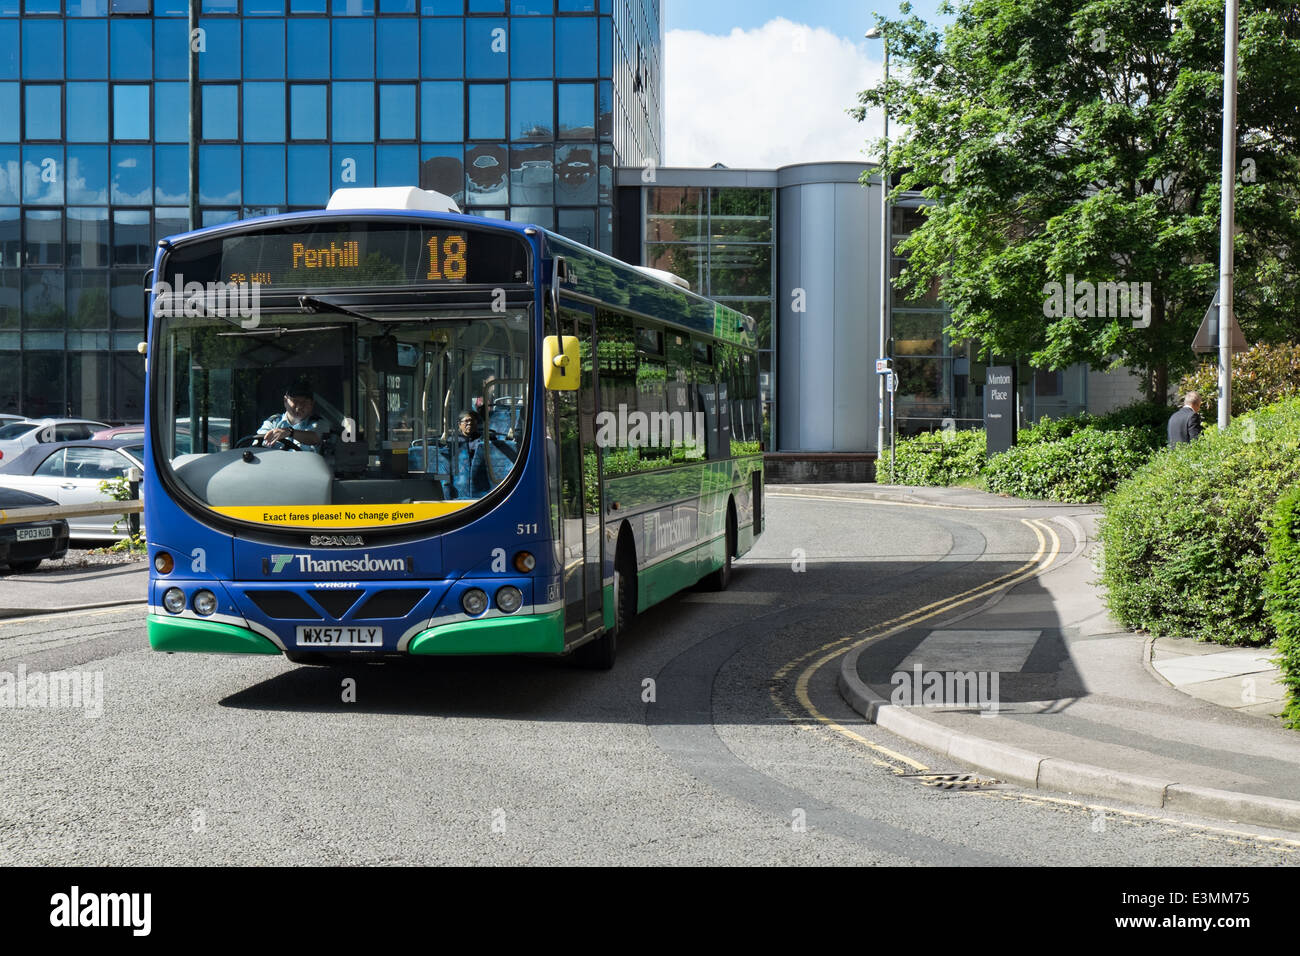 A Thamesdown transport bus bringing commuters into Swindon town centre, Wiltshire, UK Stock Photo